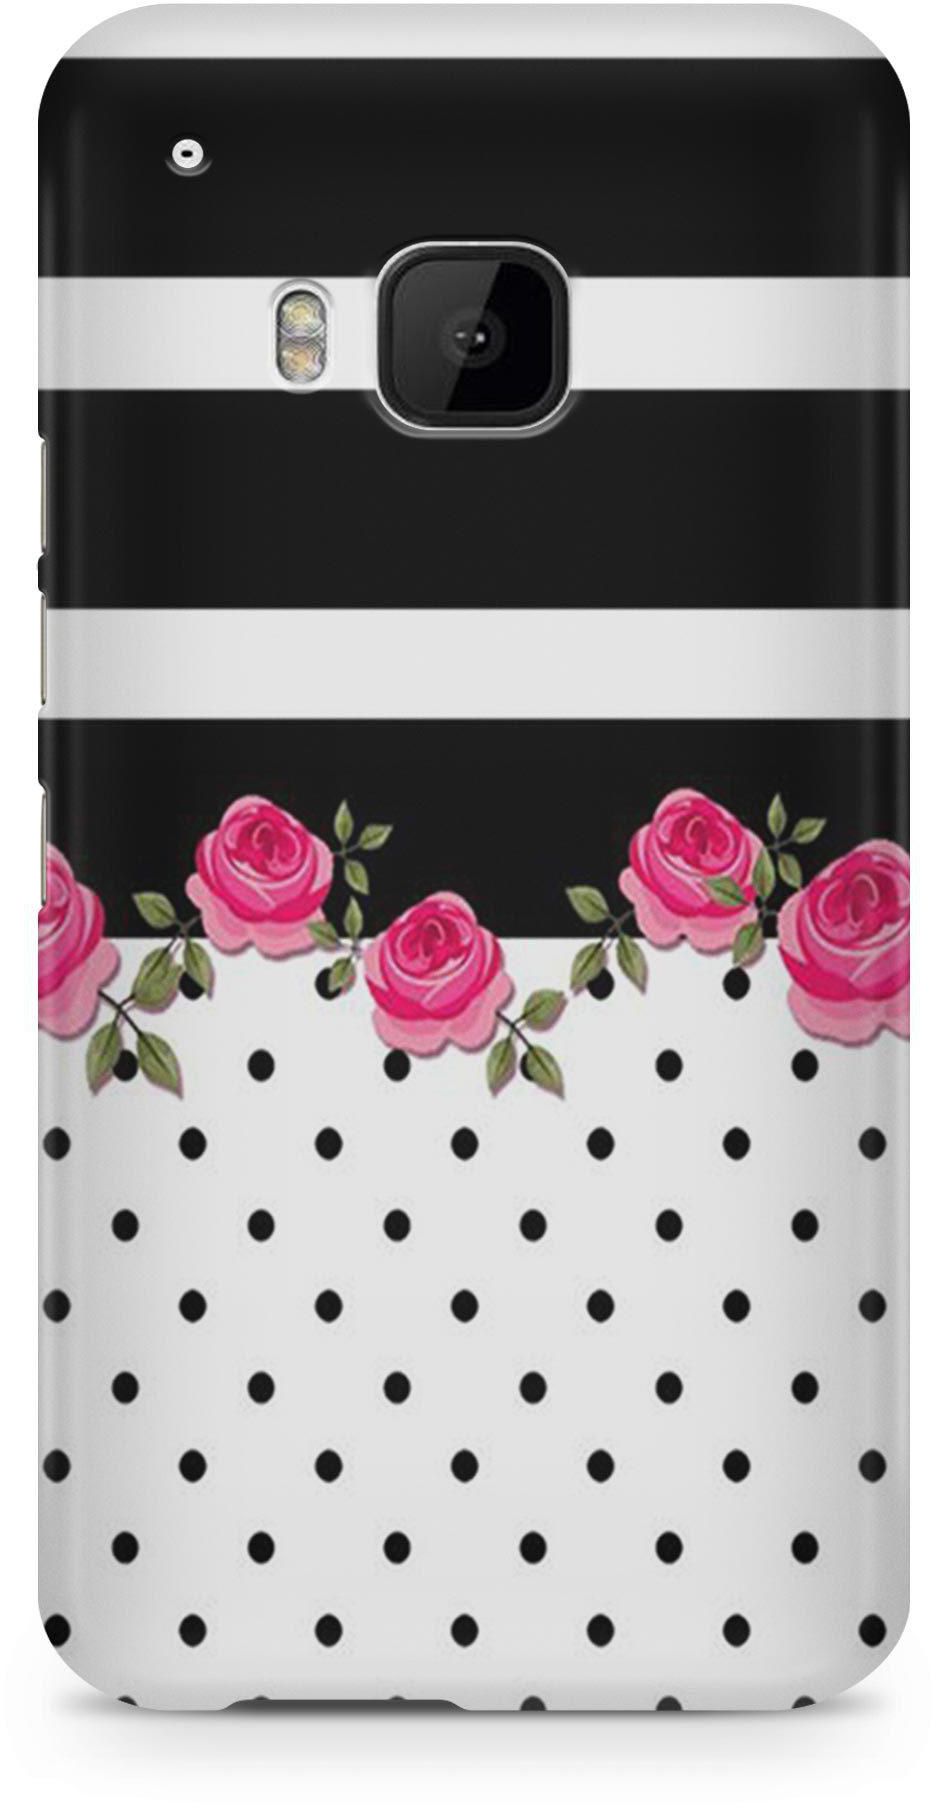 Flower Stripe Dots Polka Roses Pink Black 3D New Unique Strong Full Wrap Hard Case Cover Protector for HTC M9